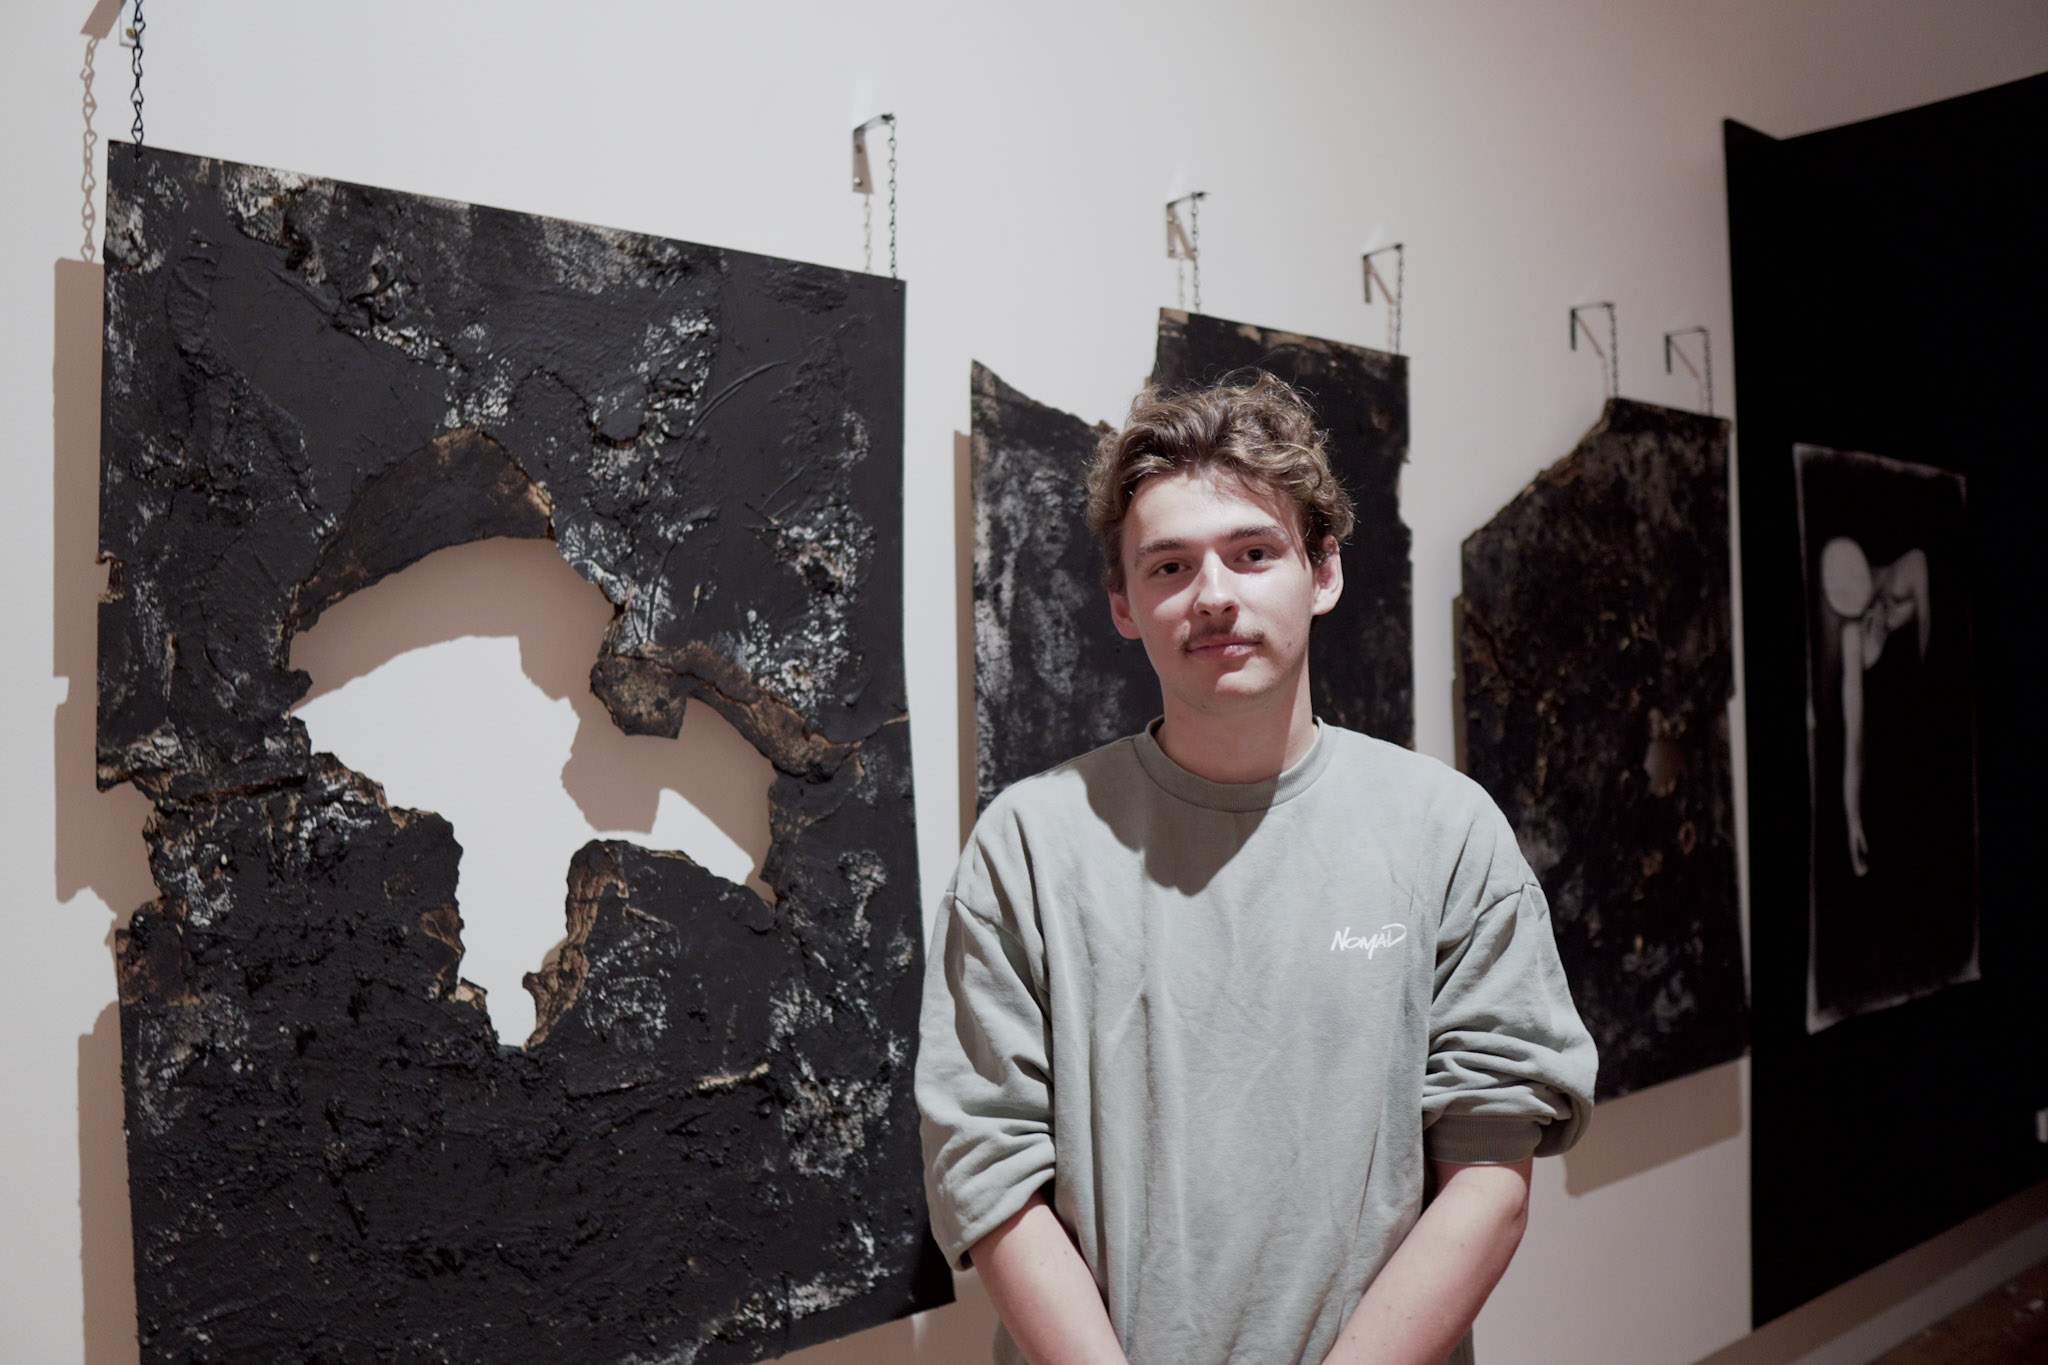 ArtRage 2023 artist Thomas stands next to his work, entitled Self Discovery